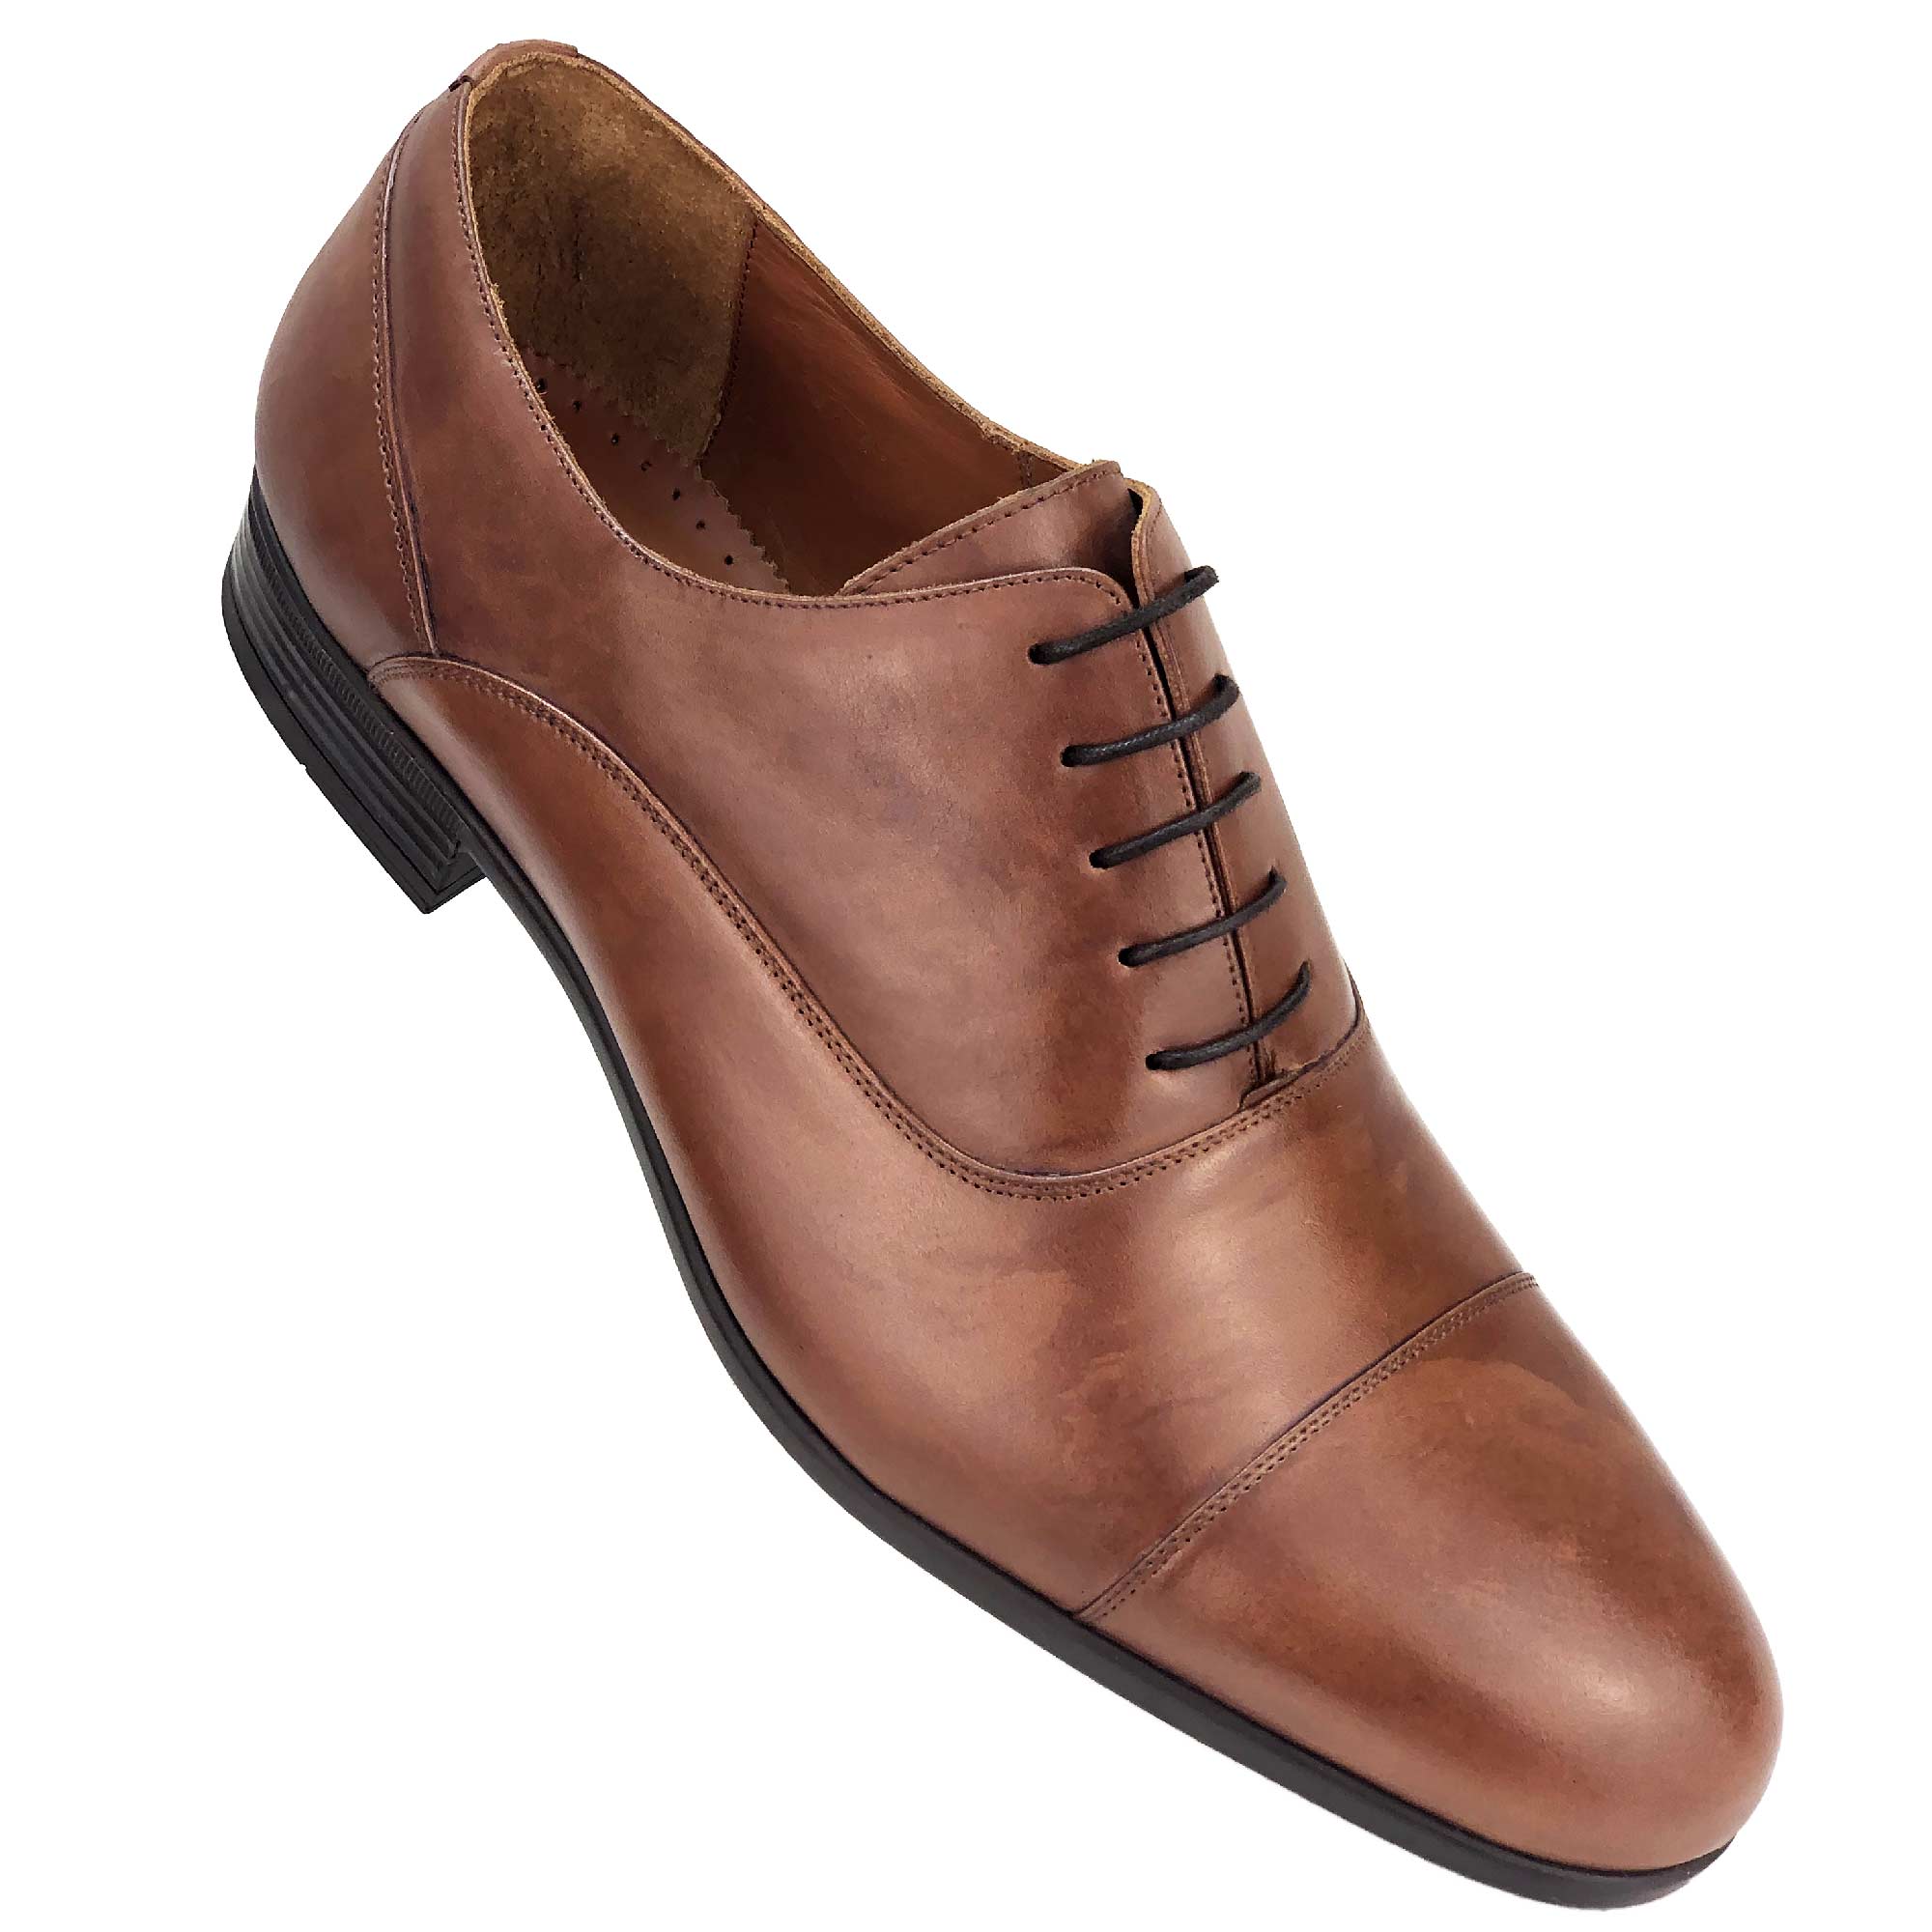 CH325-019  - Chaussure Cuir Taba - deluxe-maroc